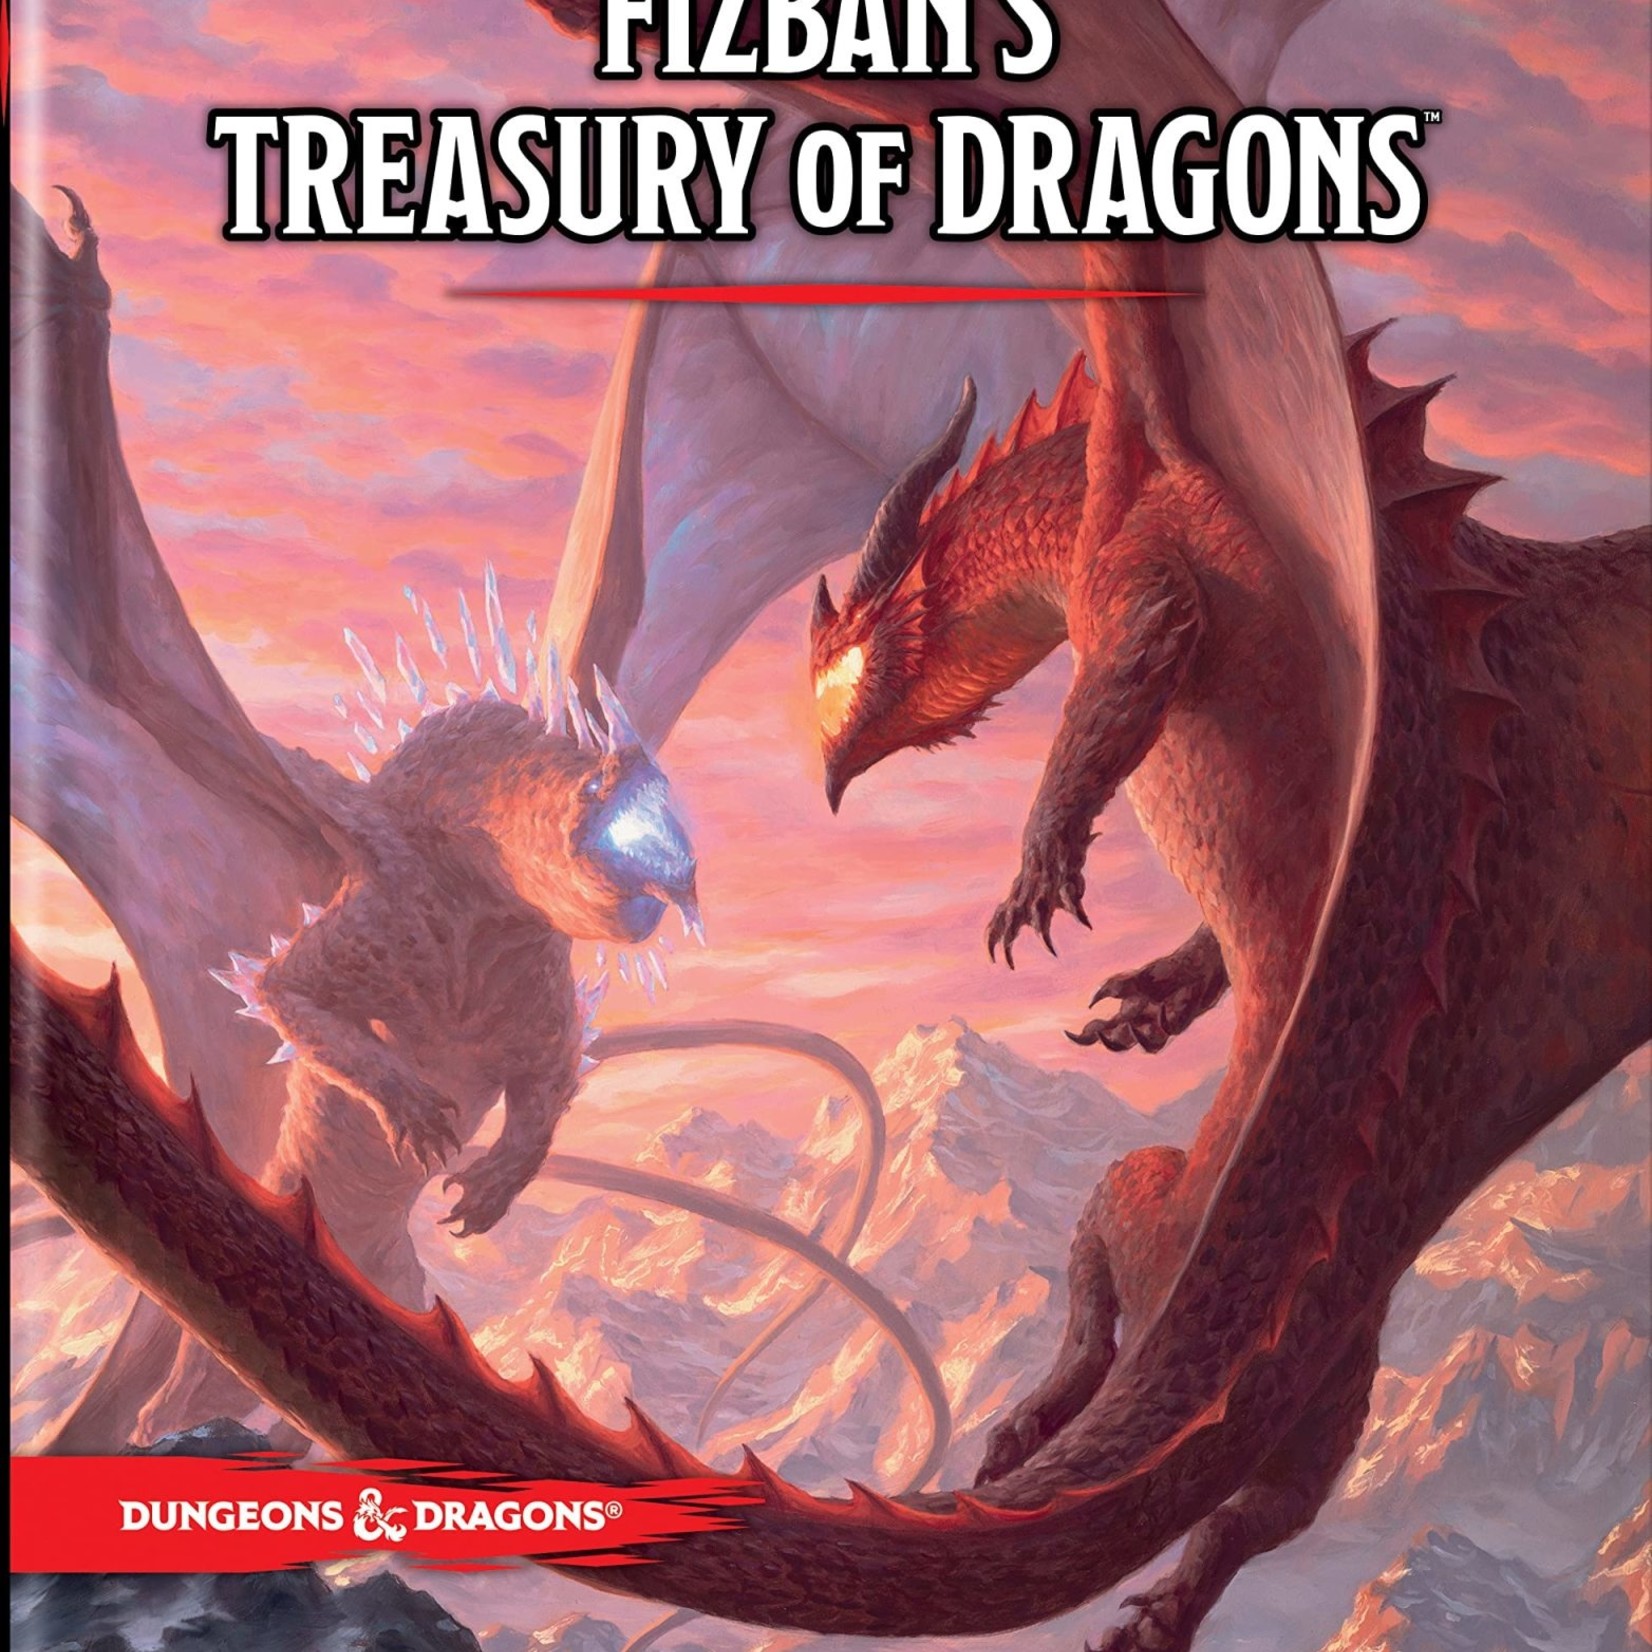 Wizards of the Coast Dungeons & Dragons 5e - Fizban's Treasury of Dragons